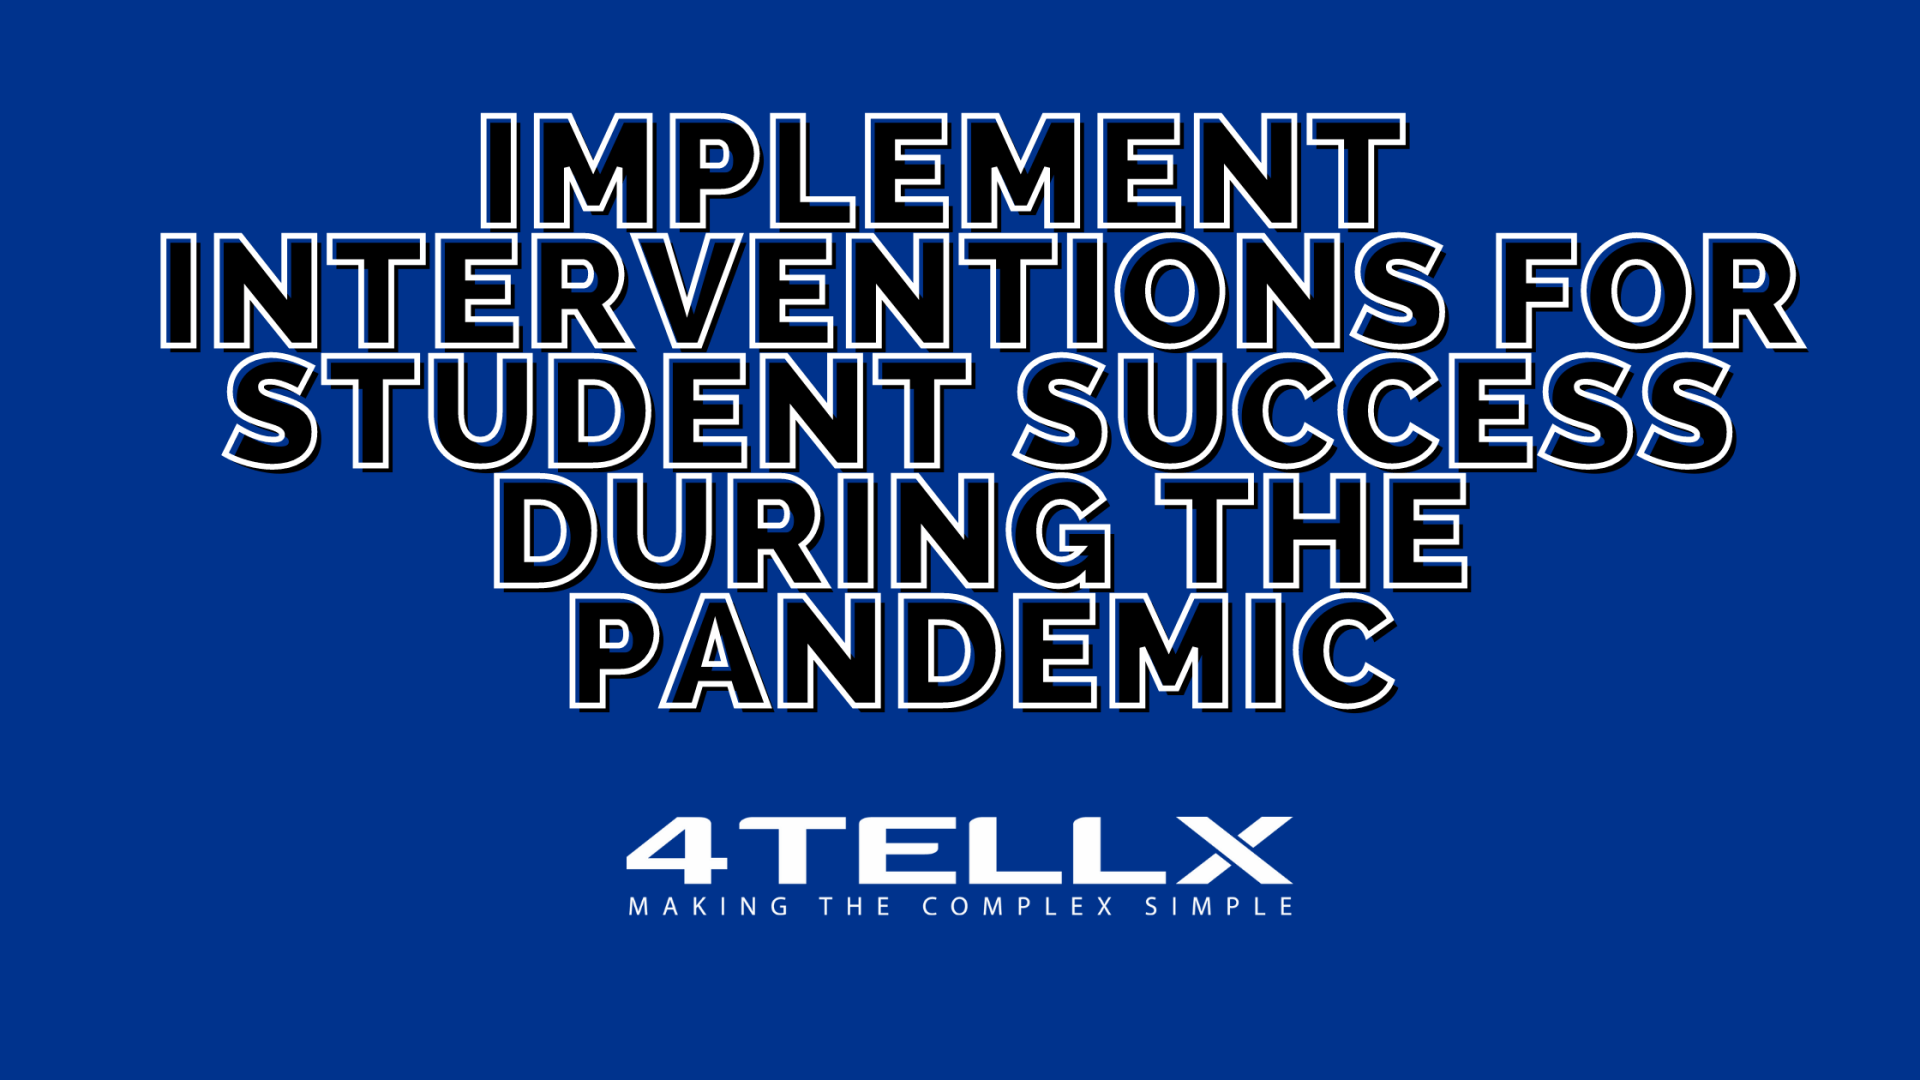 Implement Interventions for Student Success During This Pandemic